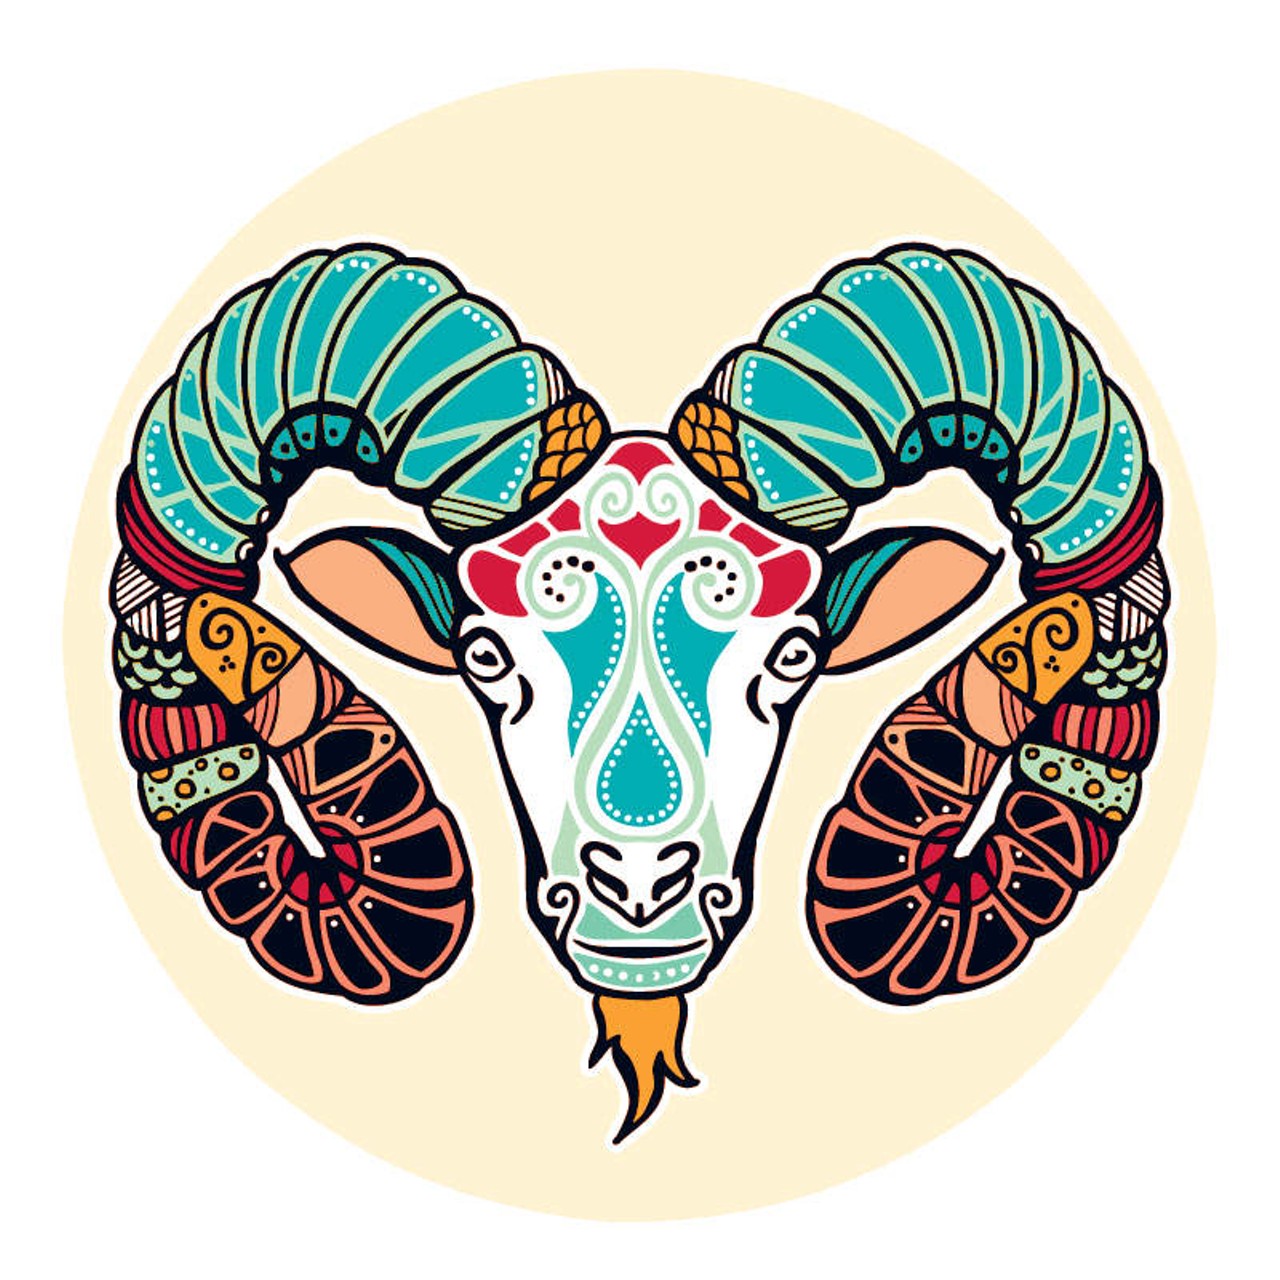 ARIES: March 21 &#150; April 20
You have more incentive than ever. Whatever it takes for you to connect with your aim is the only thing that matters. Don't think too much about what it will take to bring what looks like your whole life, to a place where it meets its apex. You won't get anywhere by letting minor rifts mess this up. Others have good reasons for keeping their distance. This is one of those times when a creative separation could serve everyone better than any effort to reconnect. Focus on your work. Stay tuned to the idea that this is part of the journey that you have to make on your own.